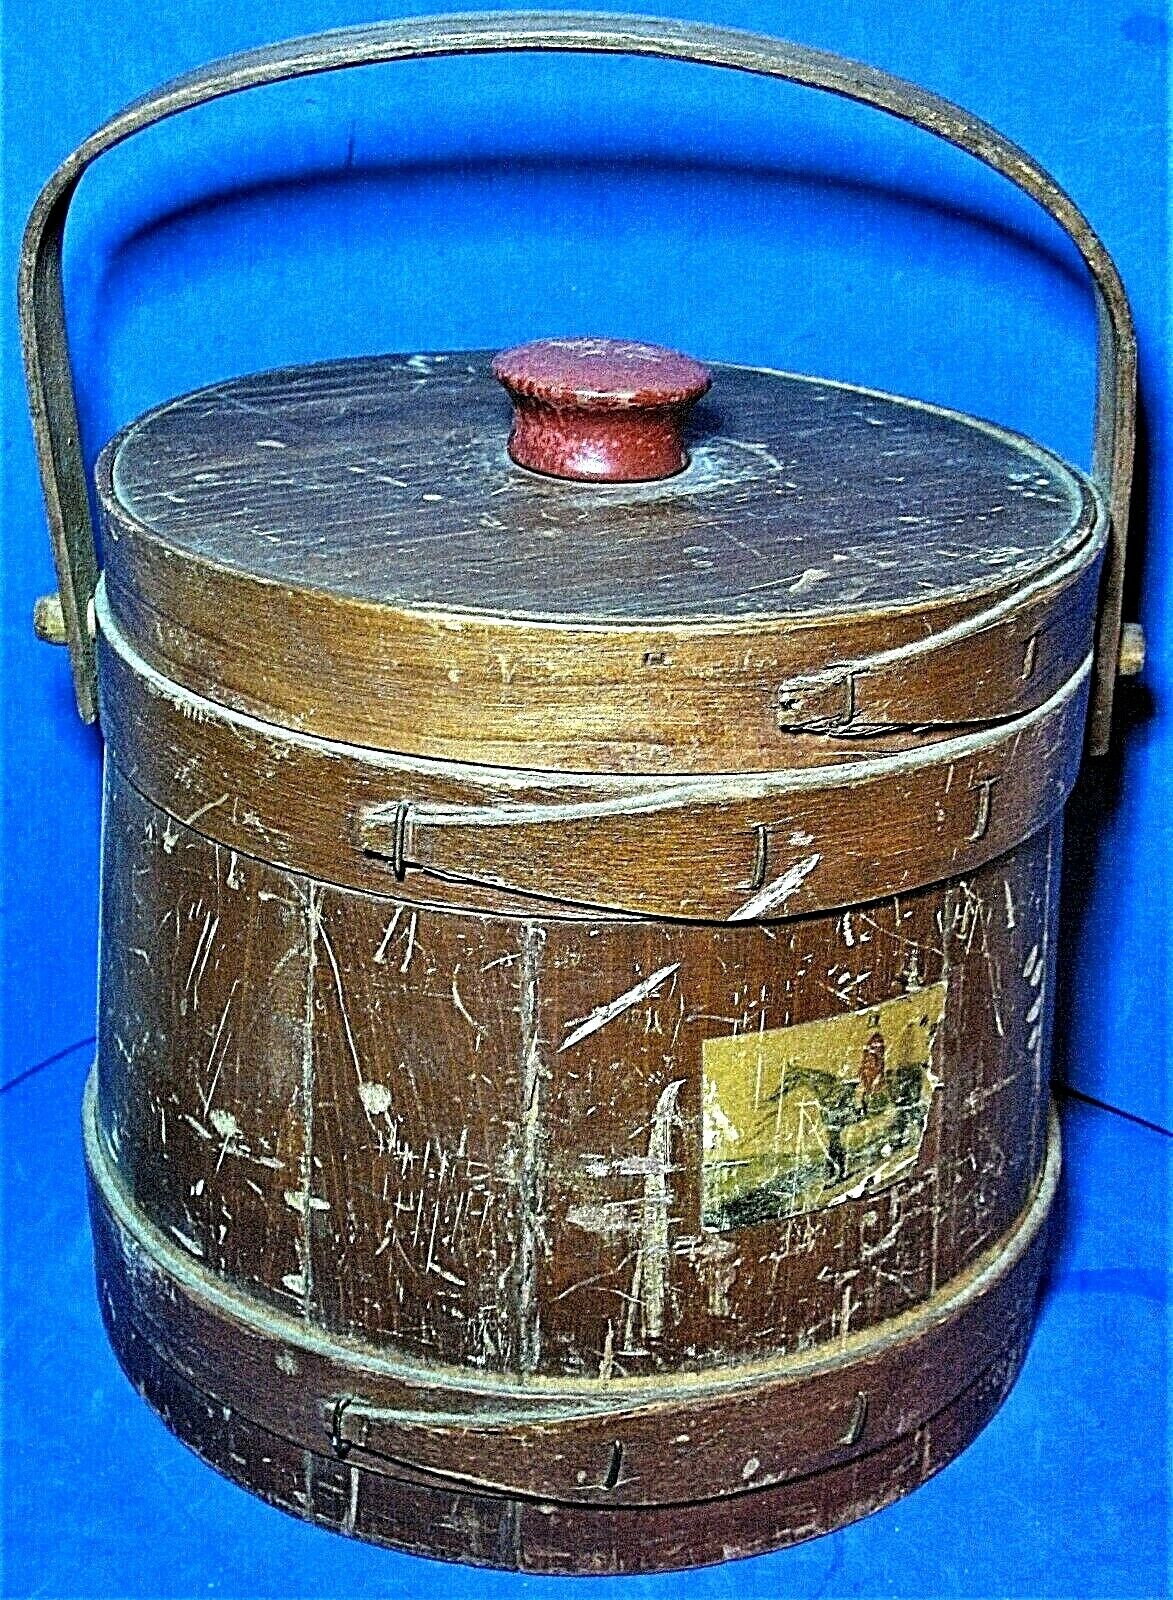 Primitive Wooden Firkin Sugar Bucket w Bent Wood Handle and Red Knobbed Cover